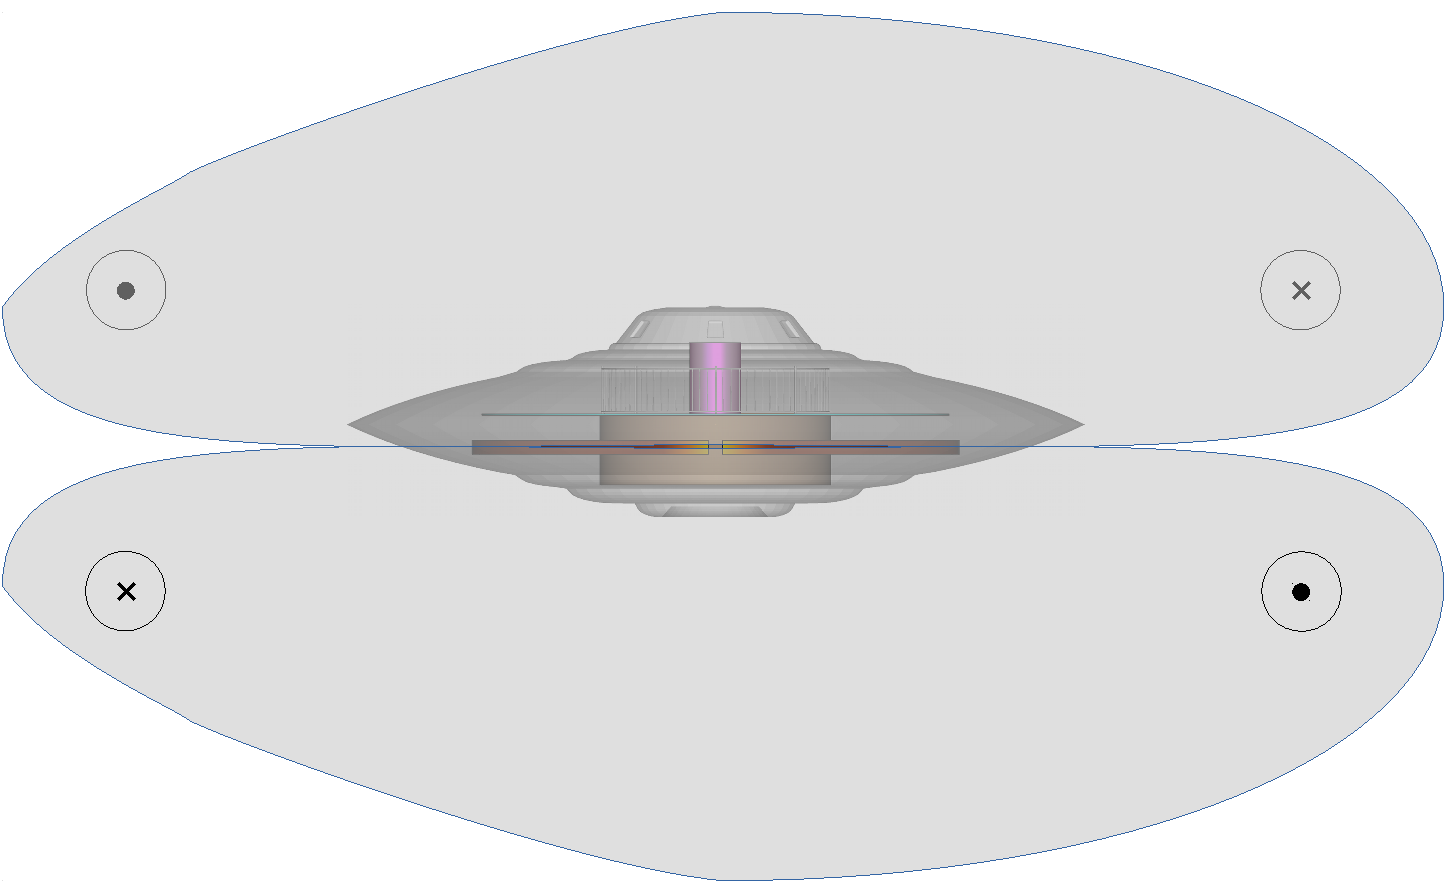 magvid-saucer-travelling-rightwards.png